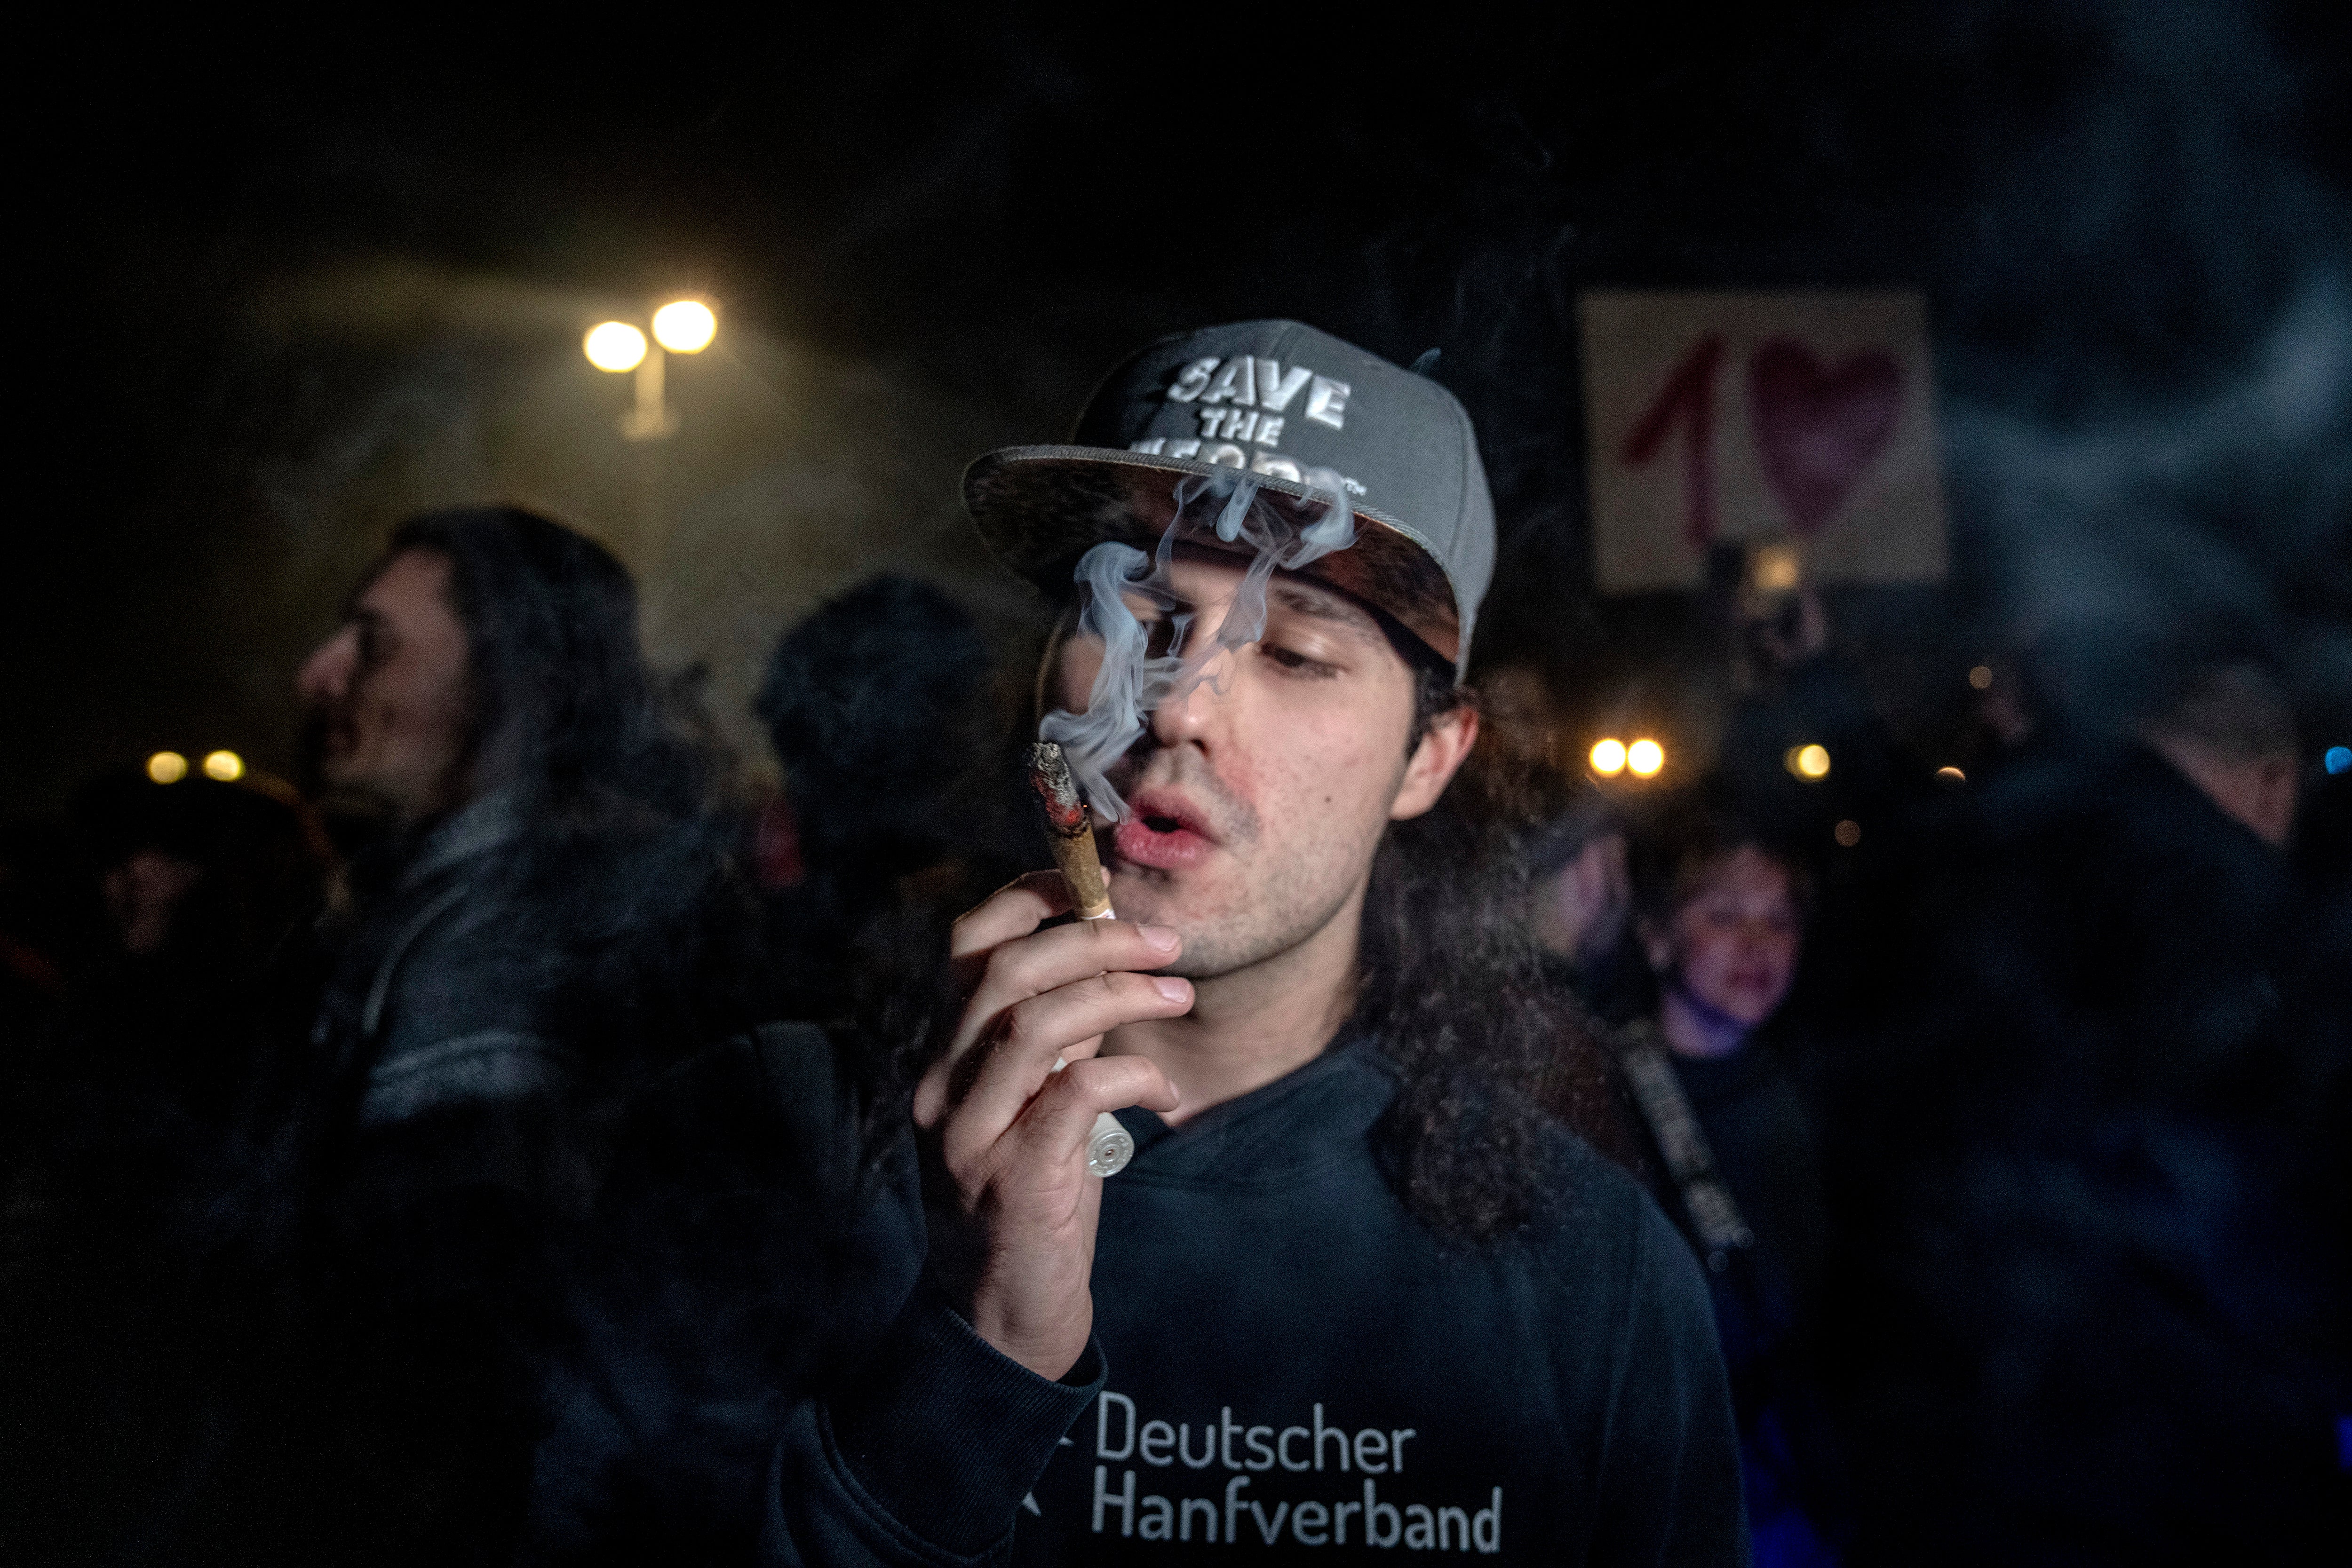 Germany has legalised possession of small amounts of cannabis